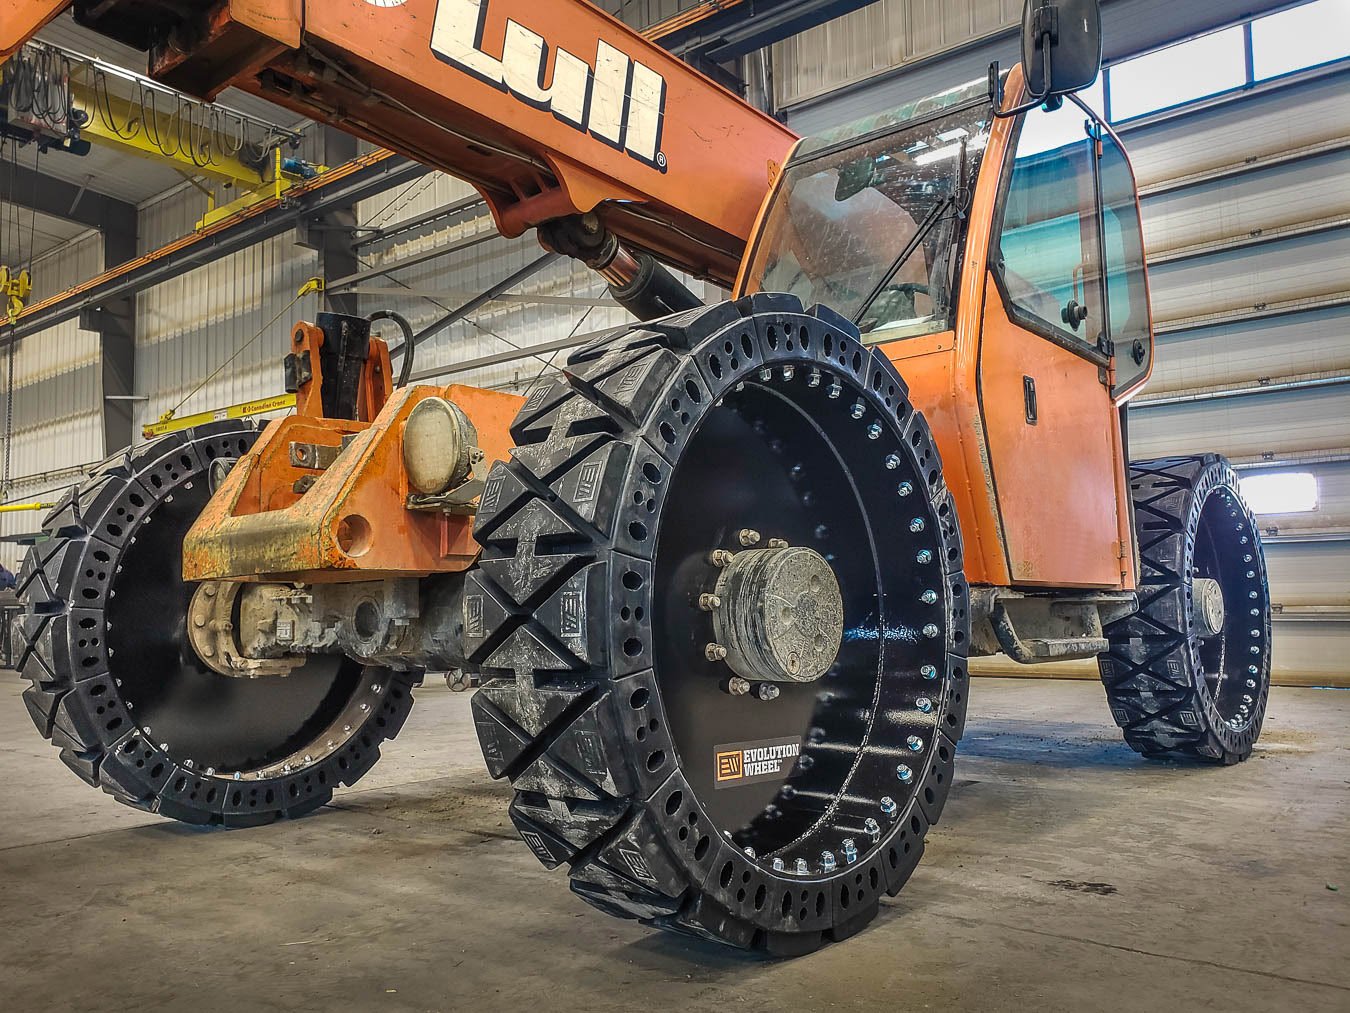 This picture shows our CAT telehandler tires on an orange Lull telehandler